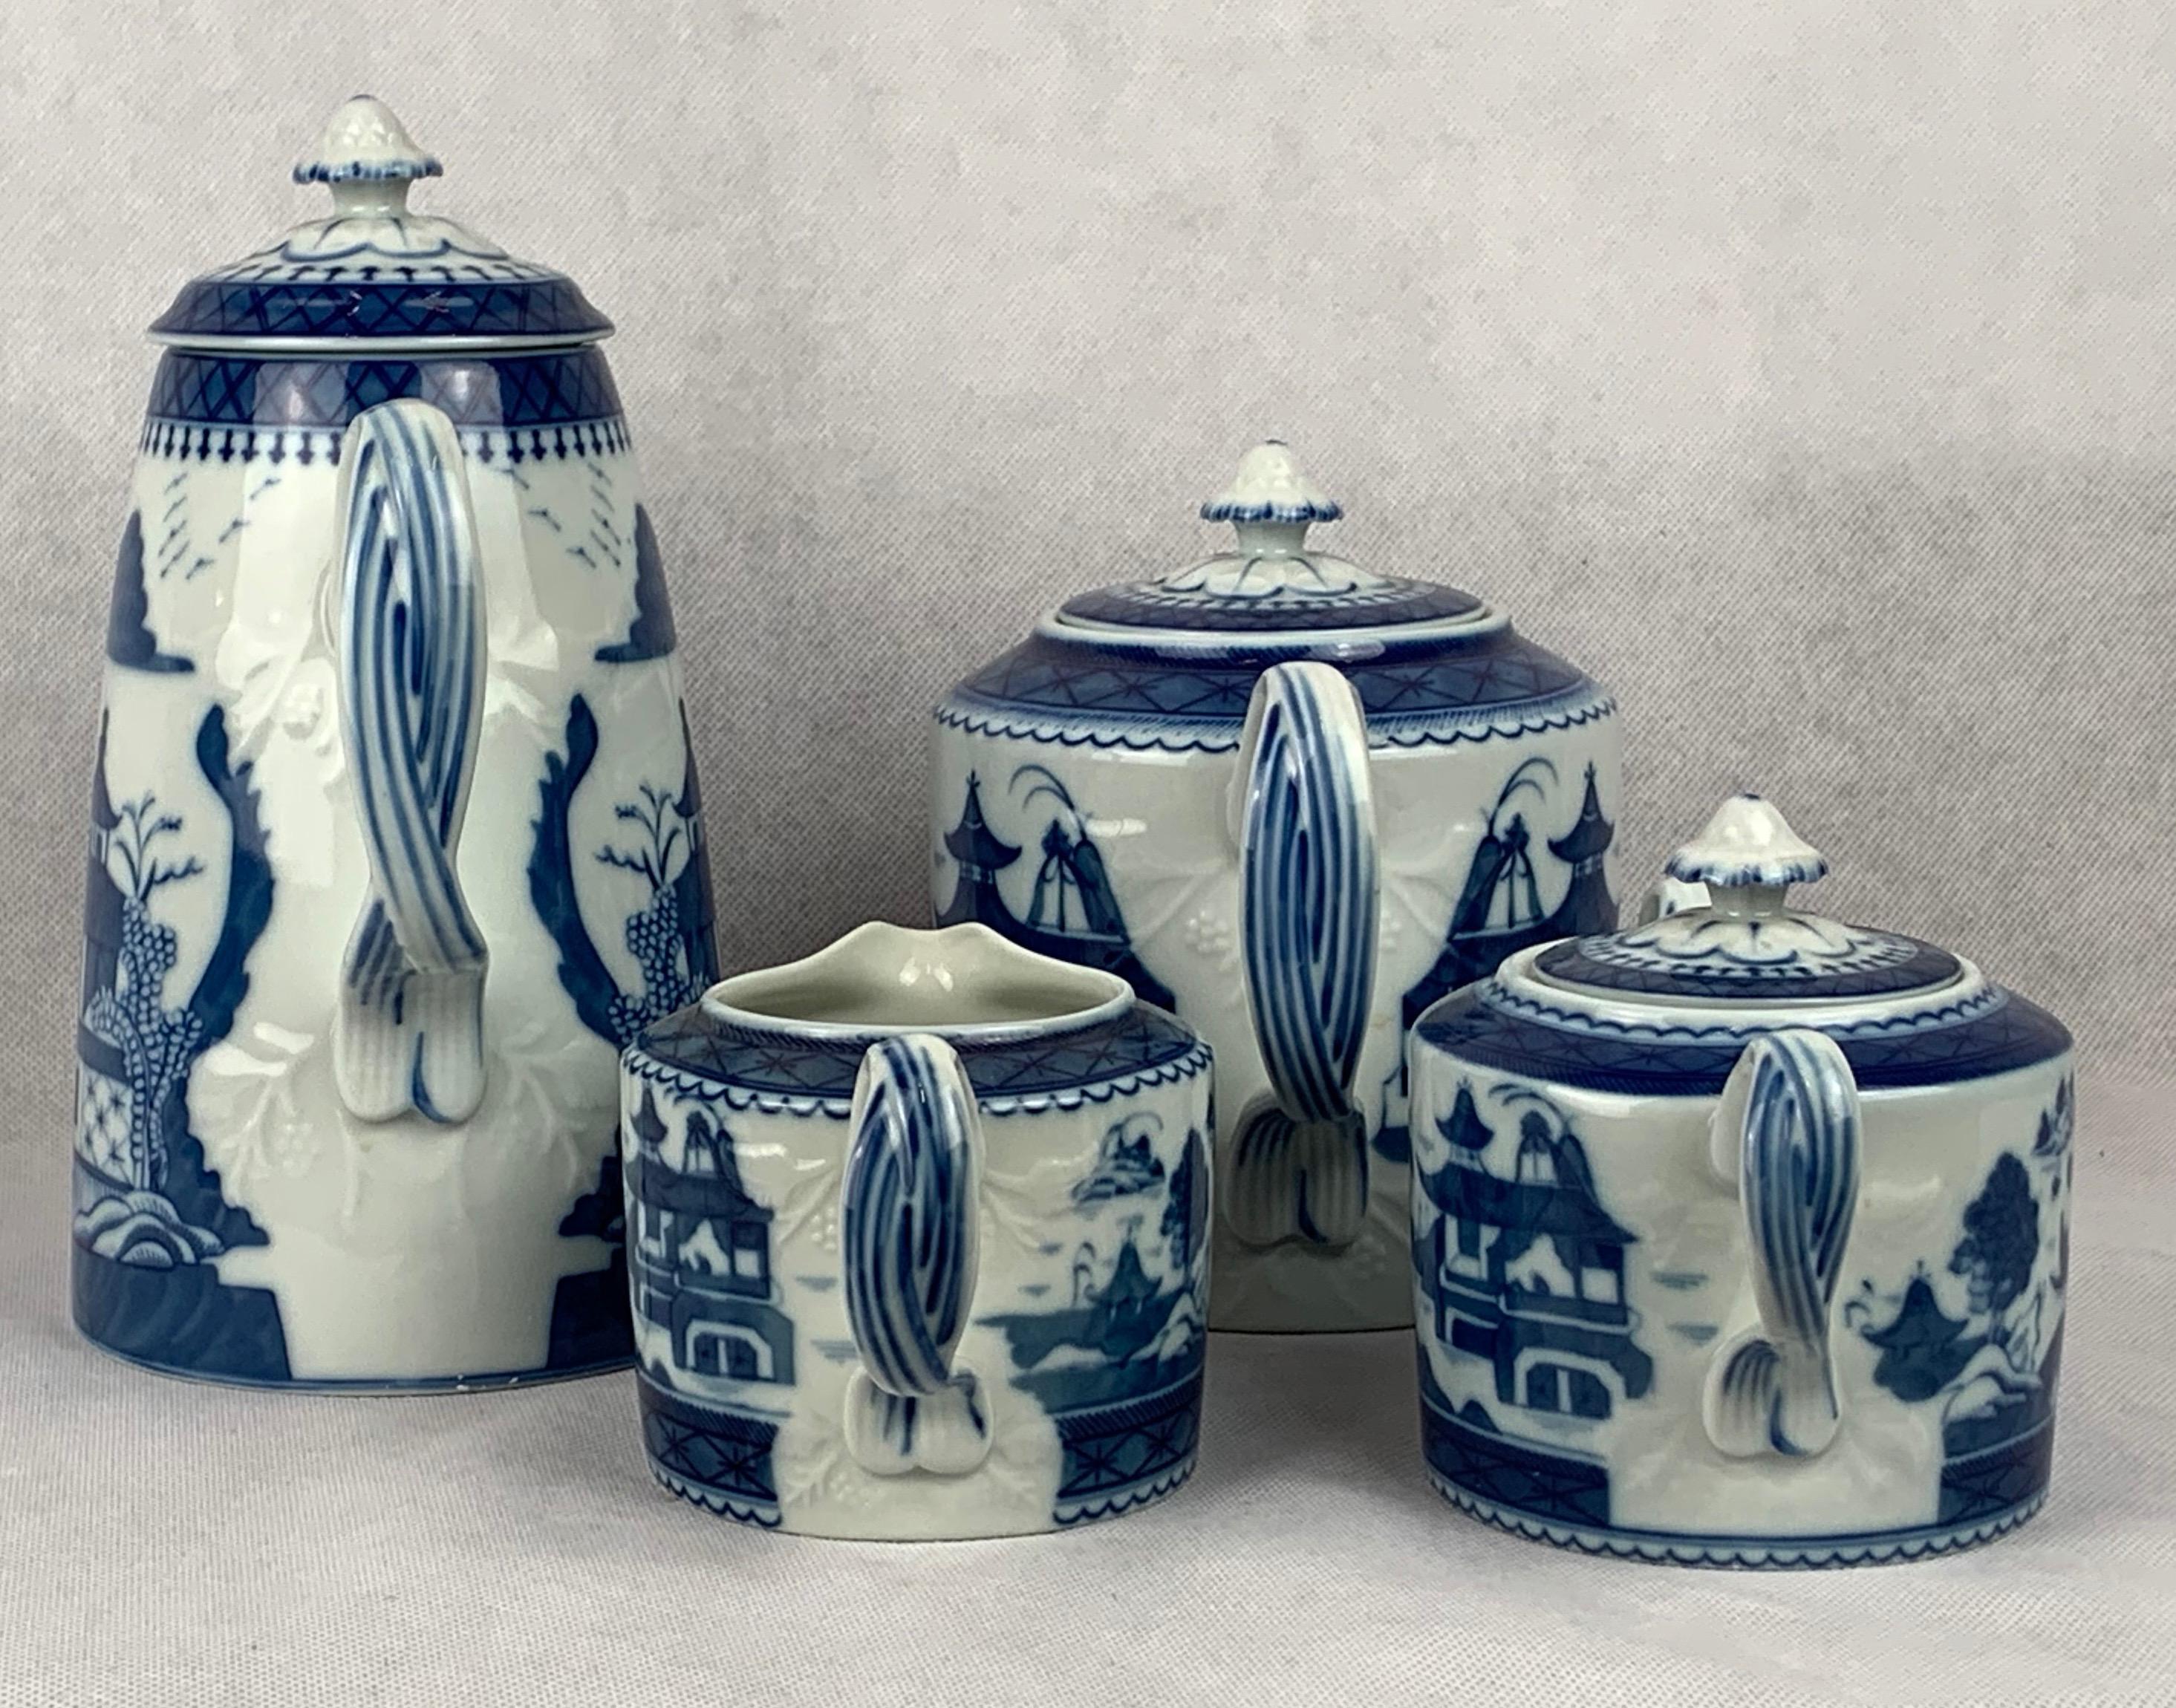 Blue Canton coffee, tea service by Vista Alegre for Mottahedeh. This porcelain set is in pristine condition and consists of a coffee pot with lid, a tea pot with lid, a sugar bowl with lid and a creamer. The pattern is after the famous Canton